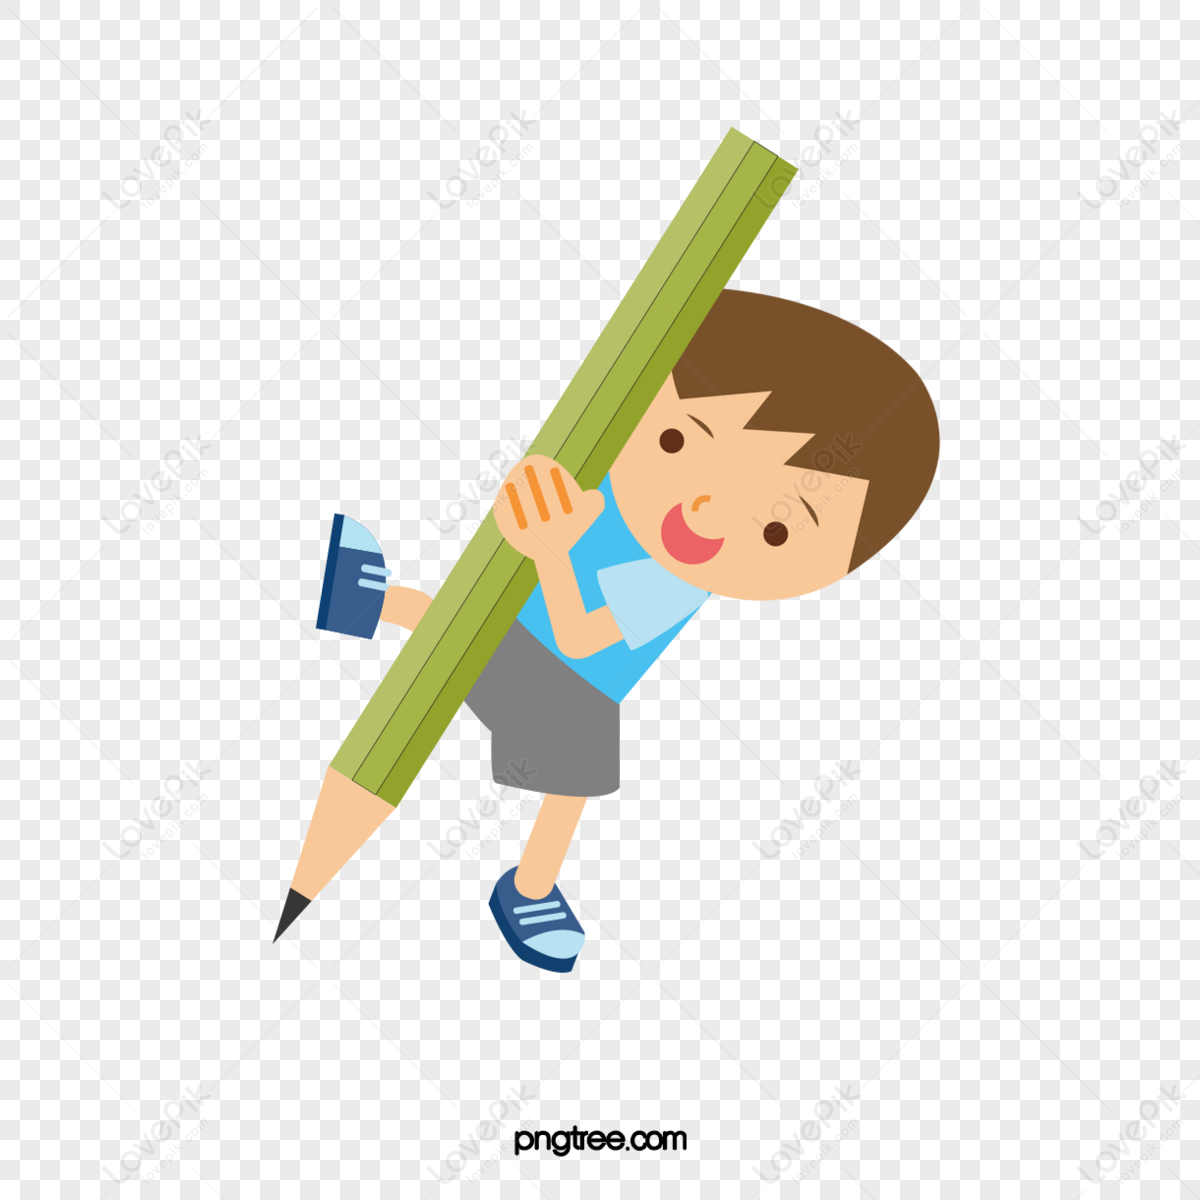 cartoon hand painted boy with pencil writing,write boy,learning png image free download